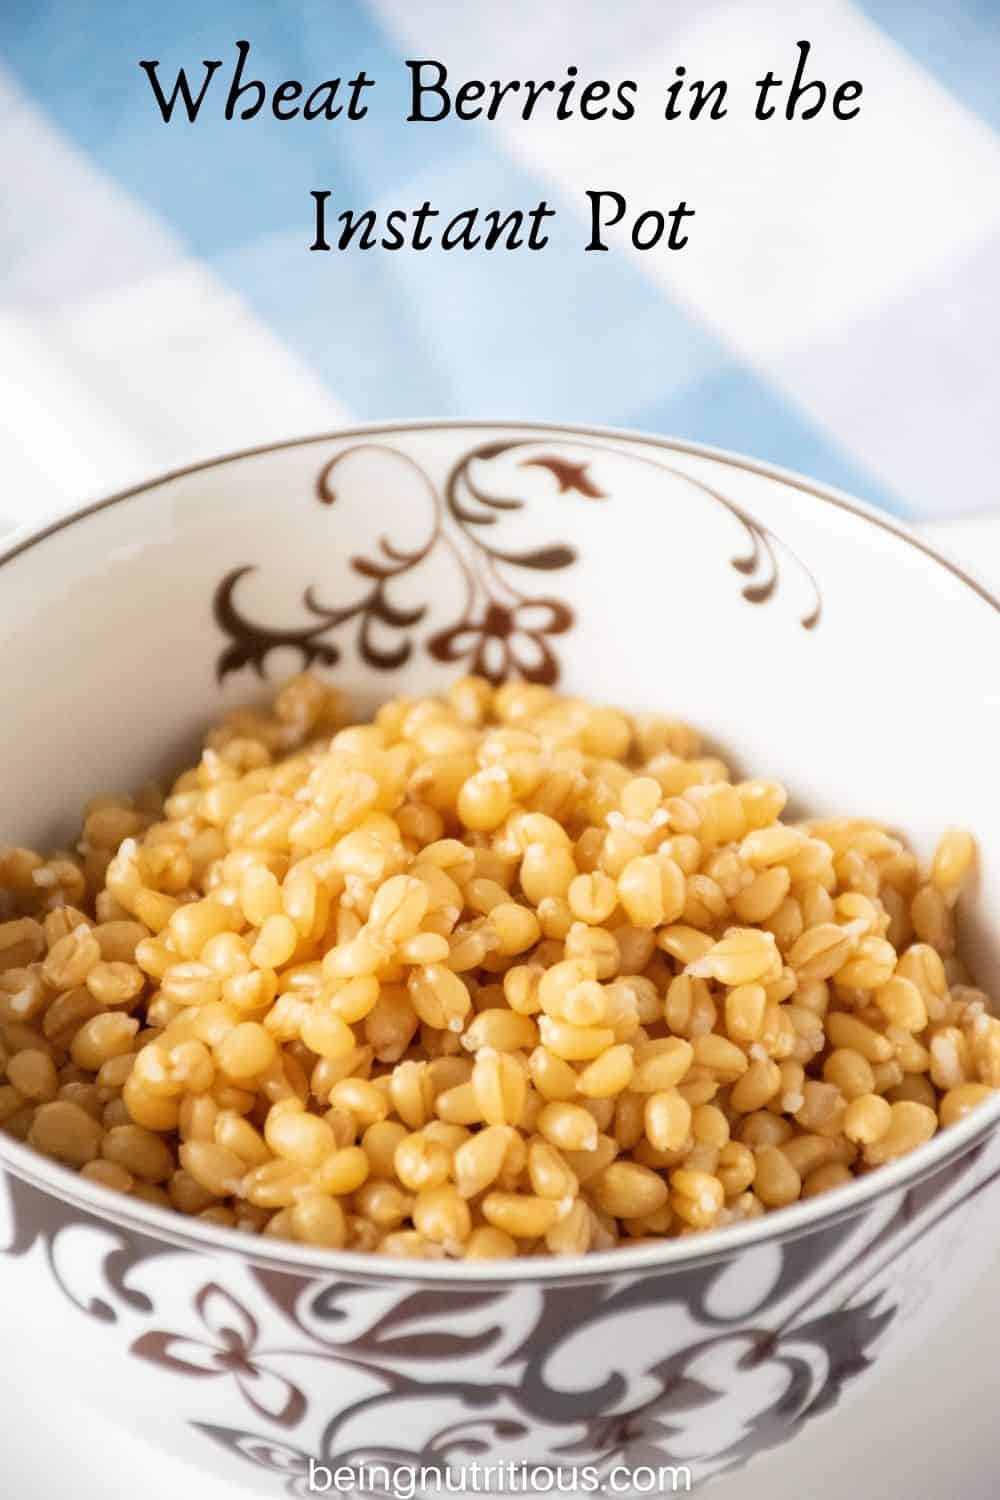 Bowl of cooked wheat berries. Text overlay: Wheat Berries in the Instant Pot.